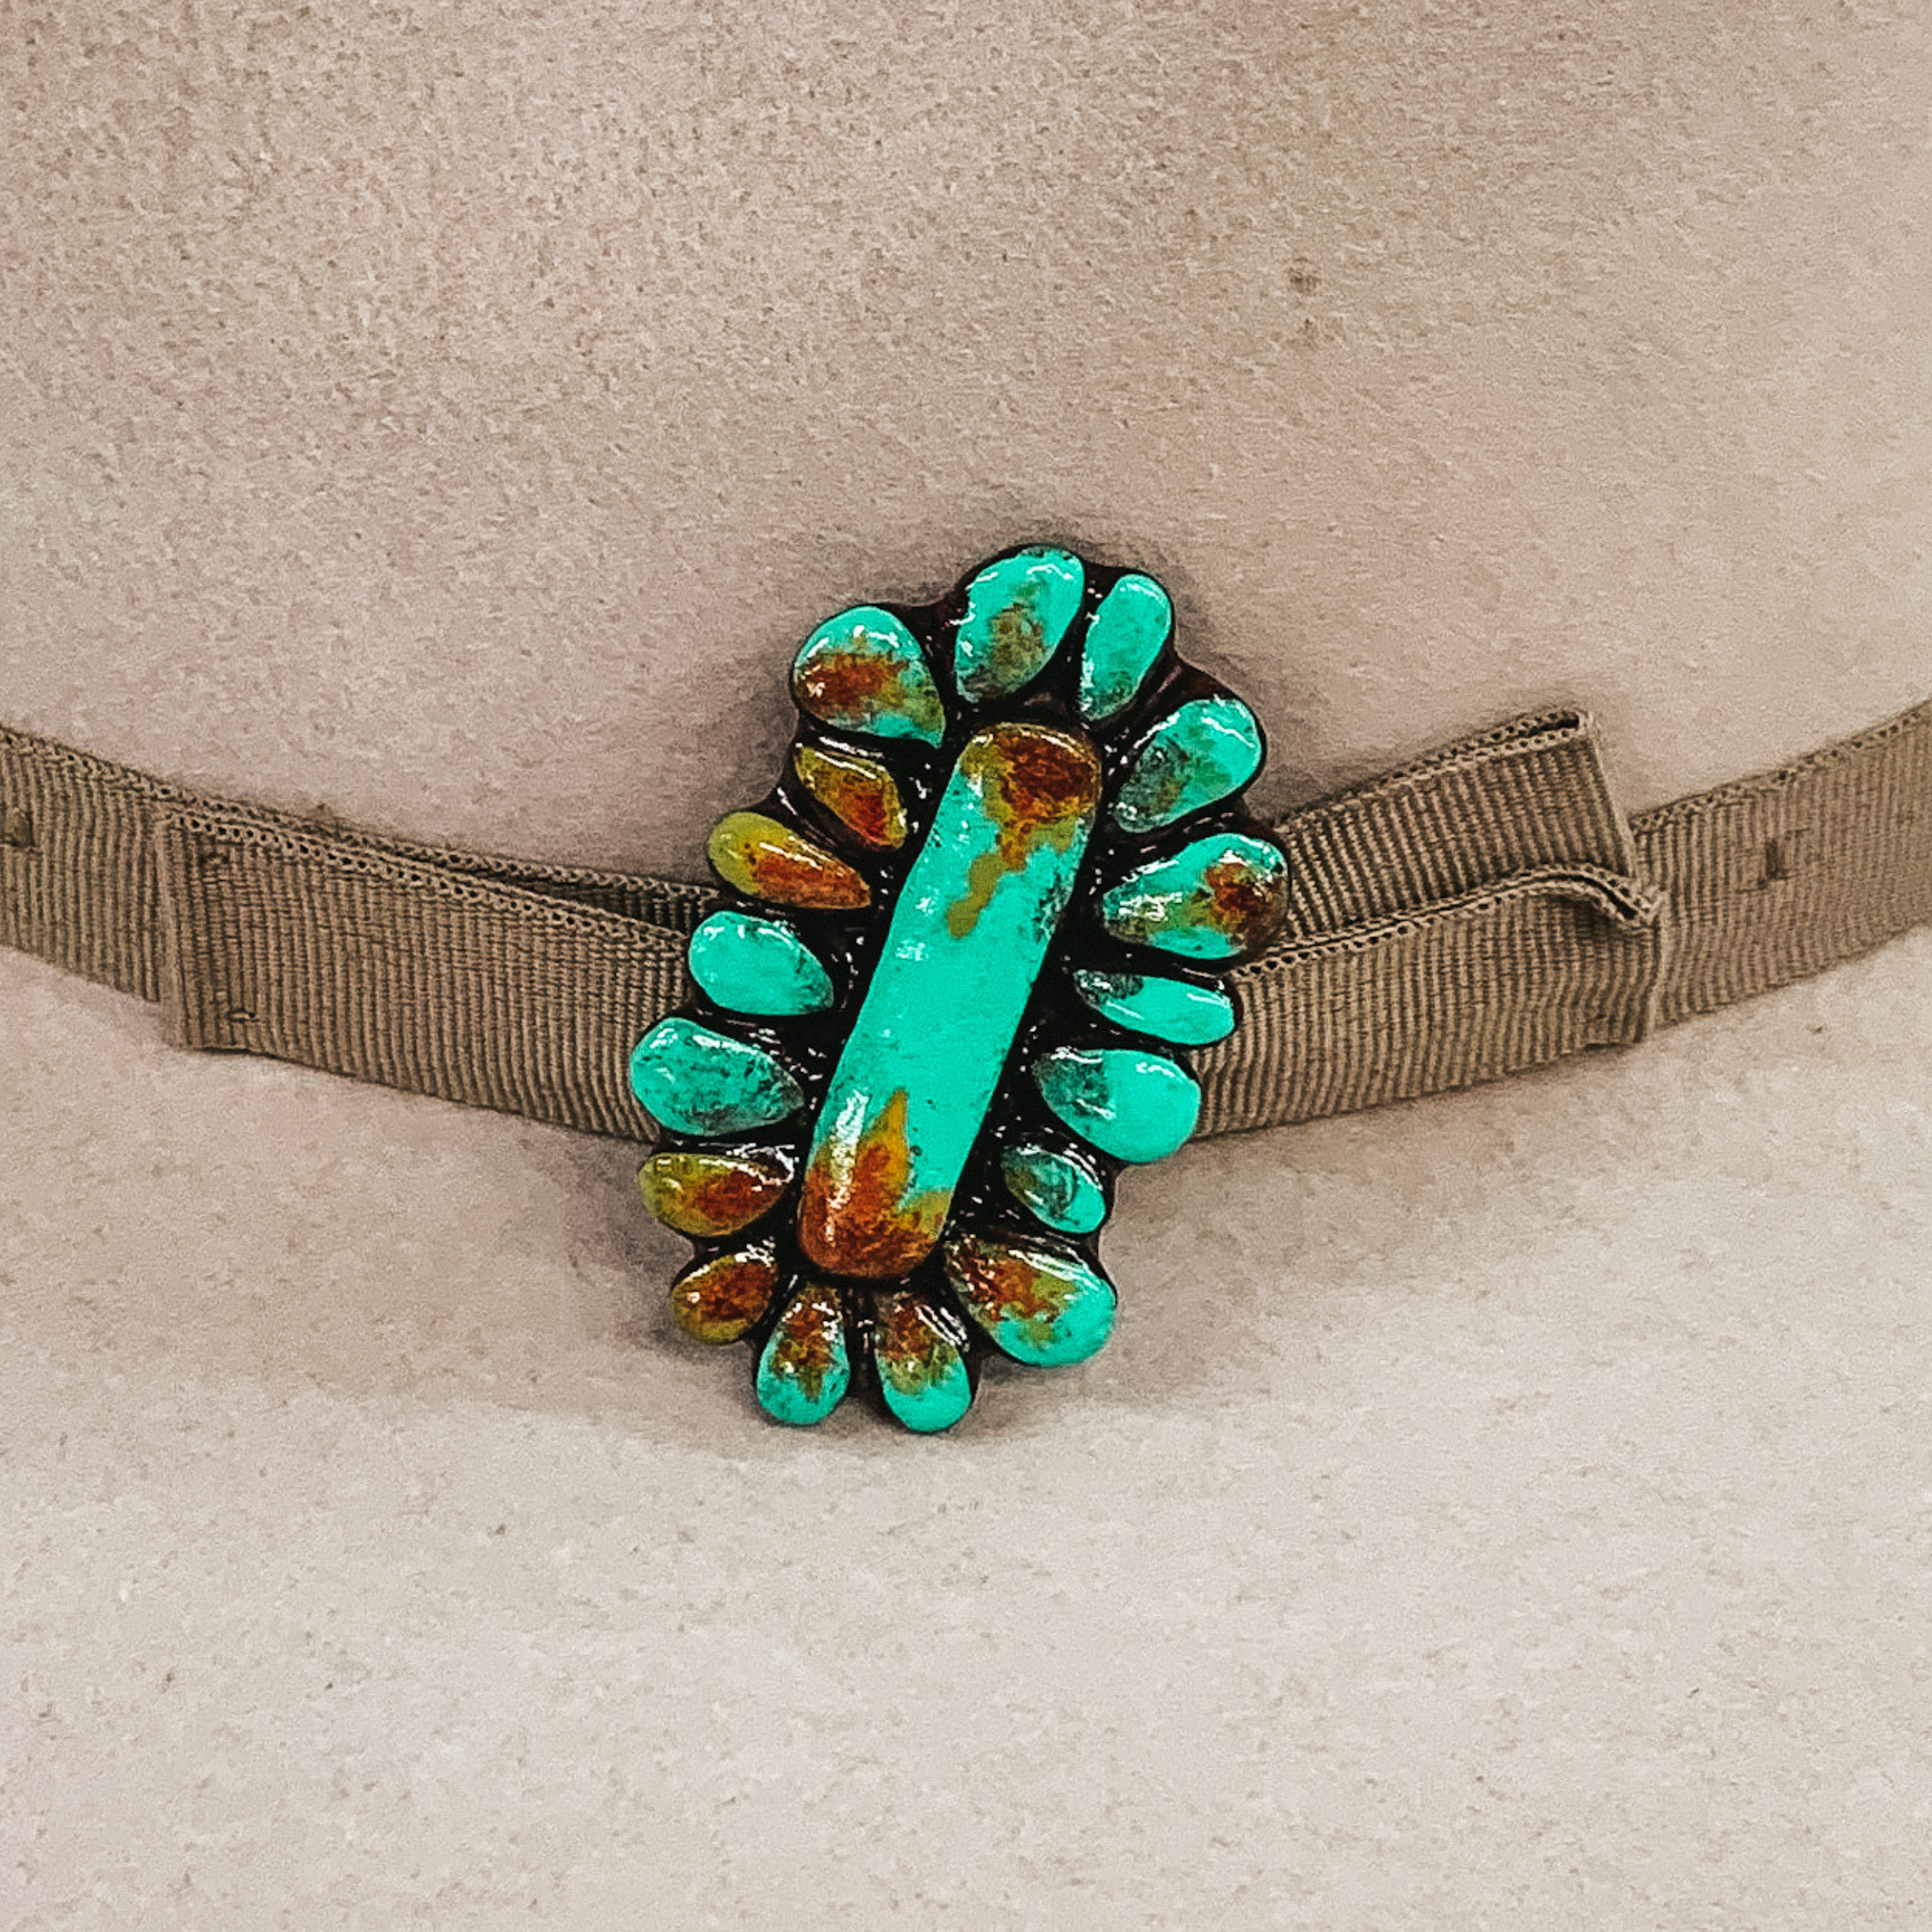 This hat pin is a long, oval concho. The main color is turquoise and is mixed with brown, red and yellow like real turquoise. This hat pin is pictured in front of a beige hat band on a light colored hat.